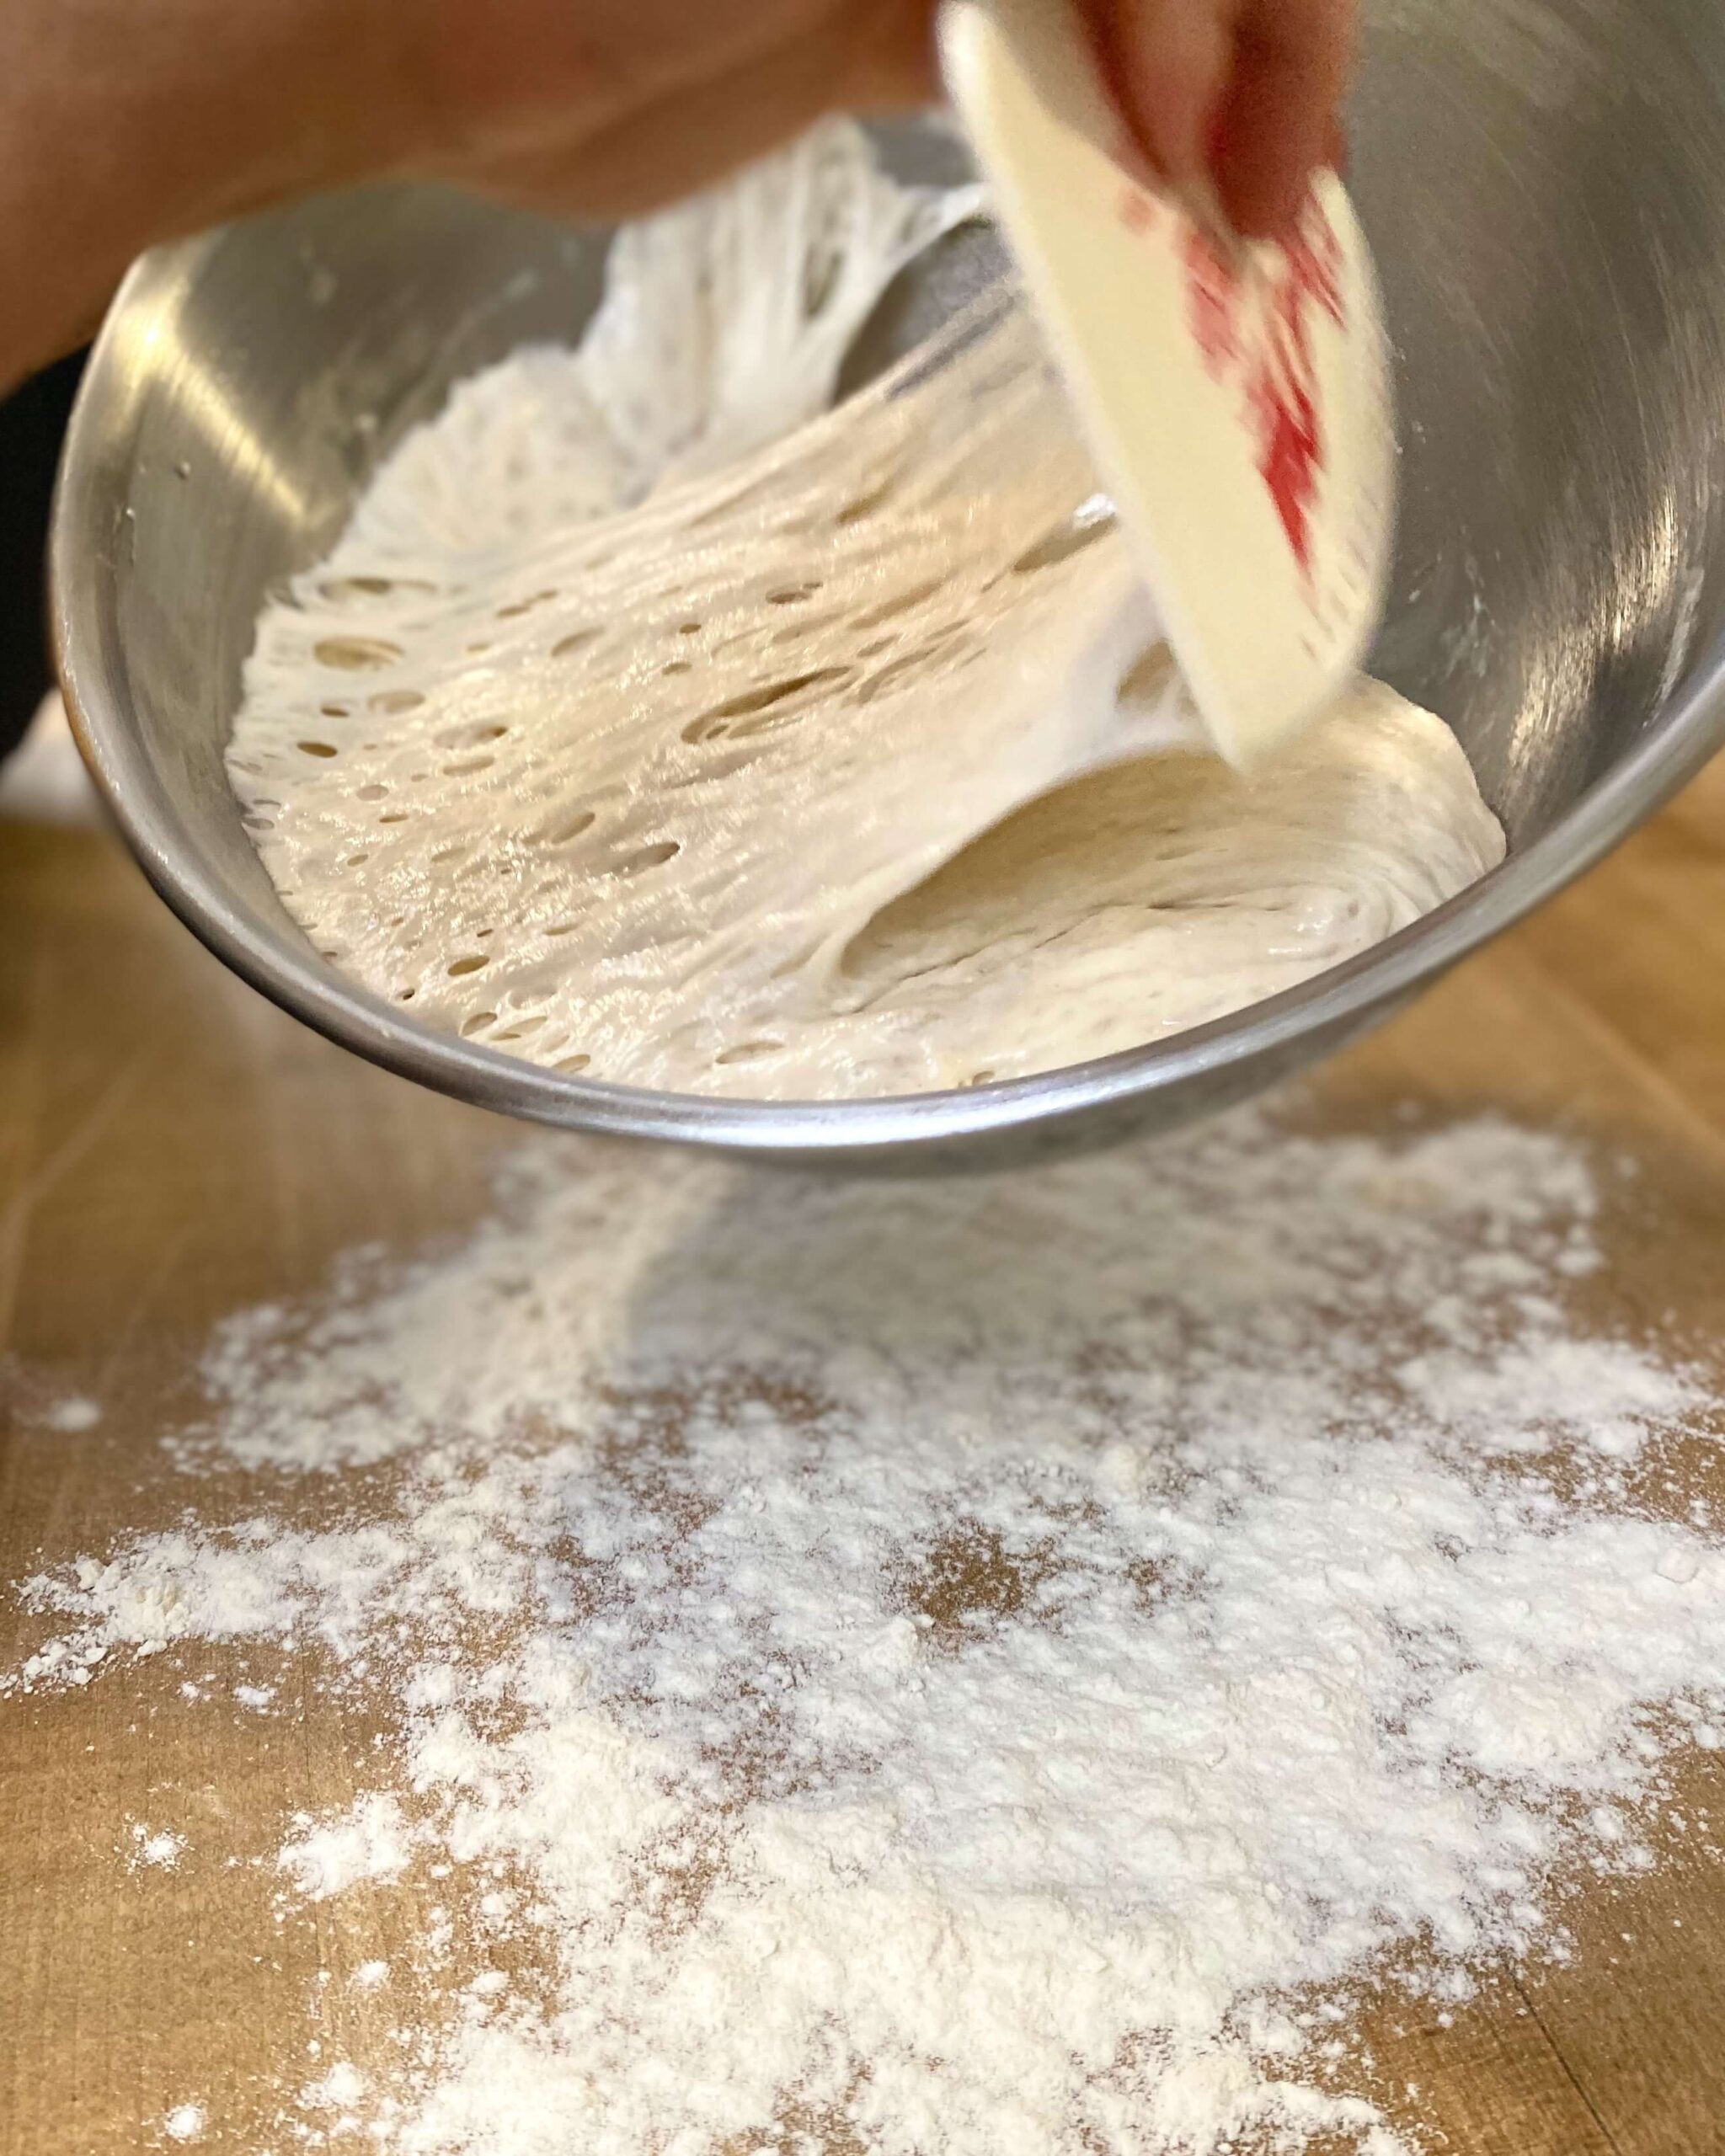 hydrated pizza dough in bowl